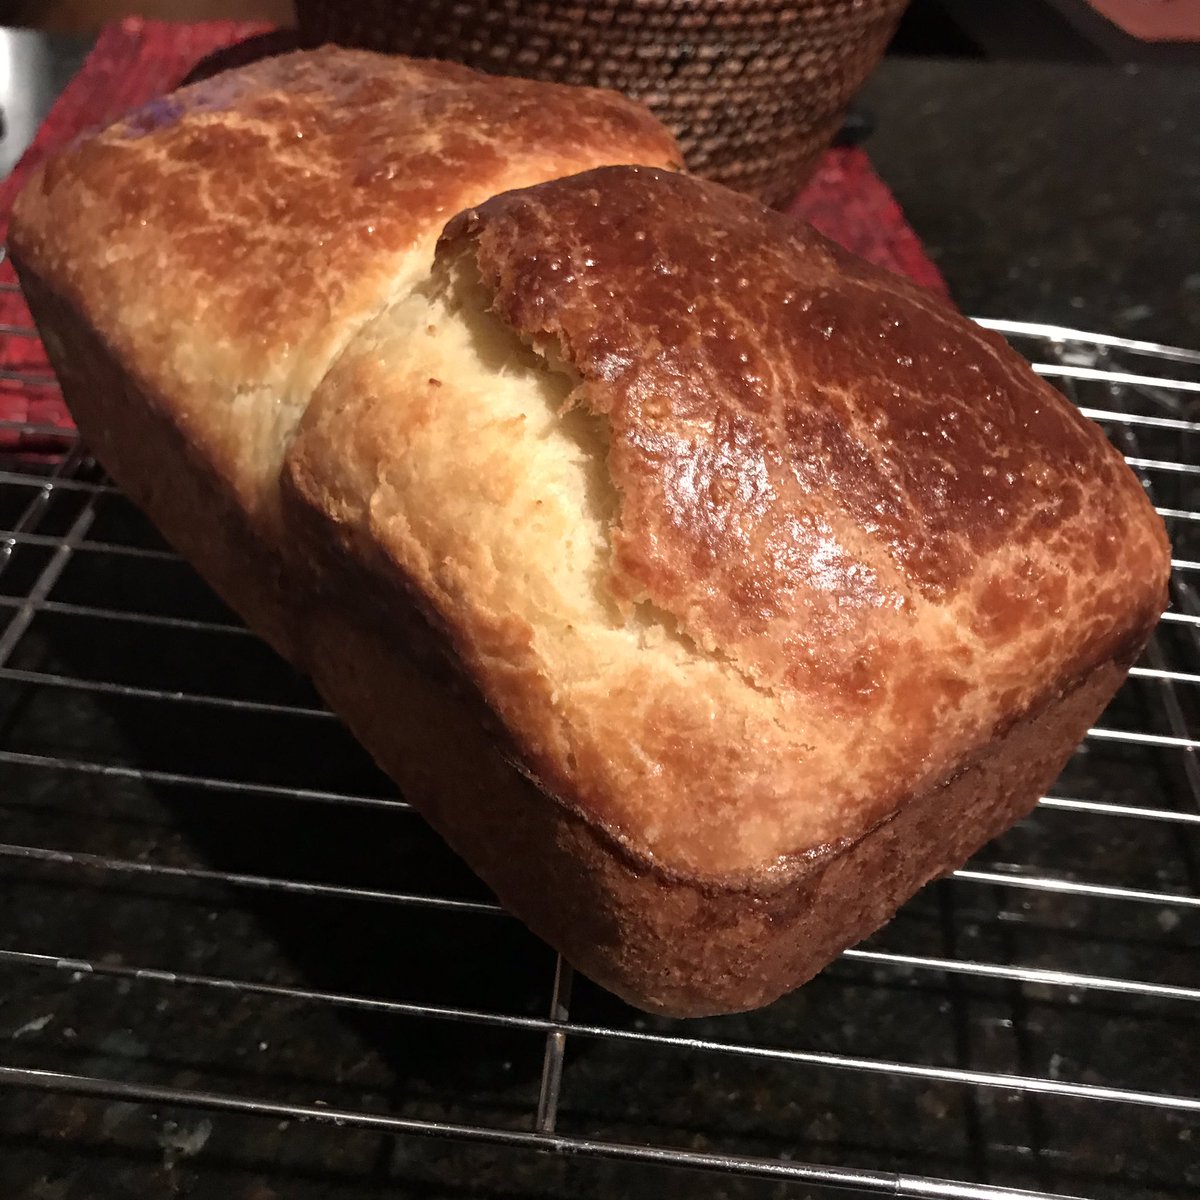 Bread #16: No-Knead Brioche. this is a record-breaking bread. It took me like 26 hours, so it didn’t even fit into one IG story! this bread applies the no-knead method (where you let the dough rest for a long long time in the fridge, in this case 16+ hours) to brioche.